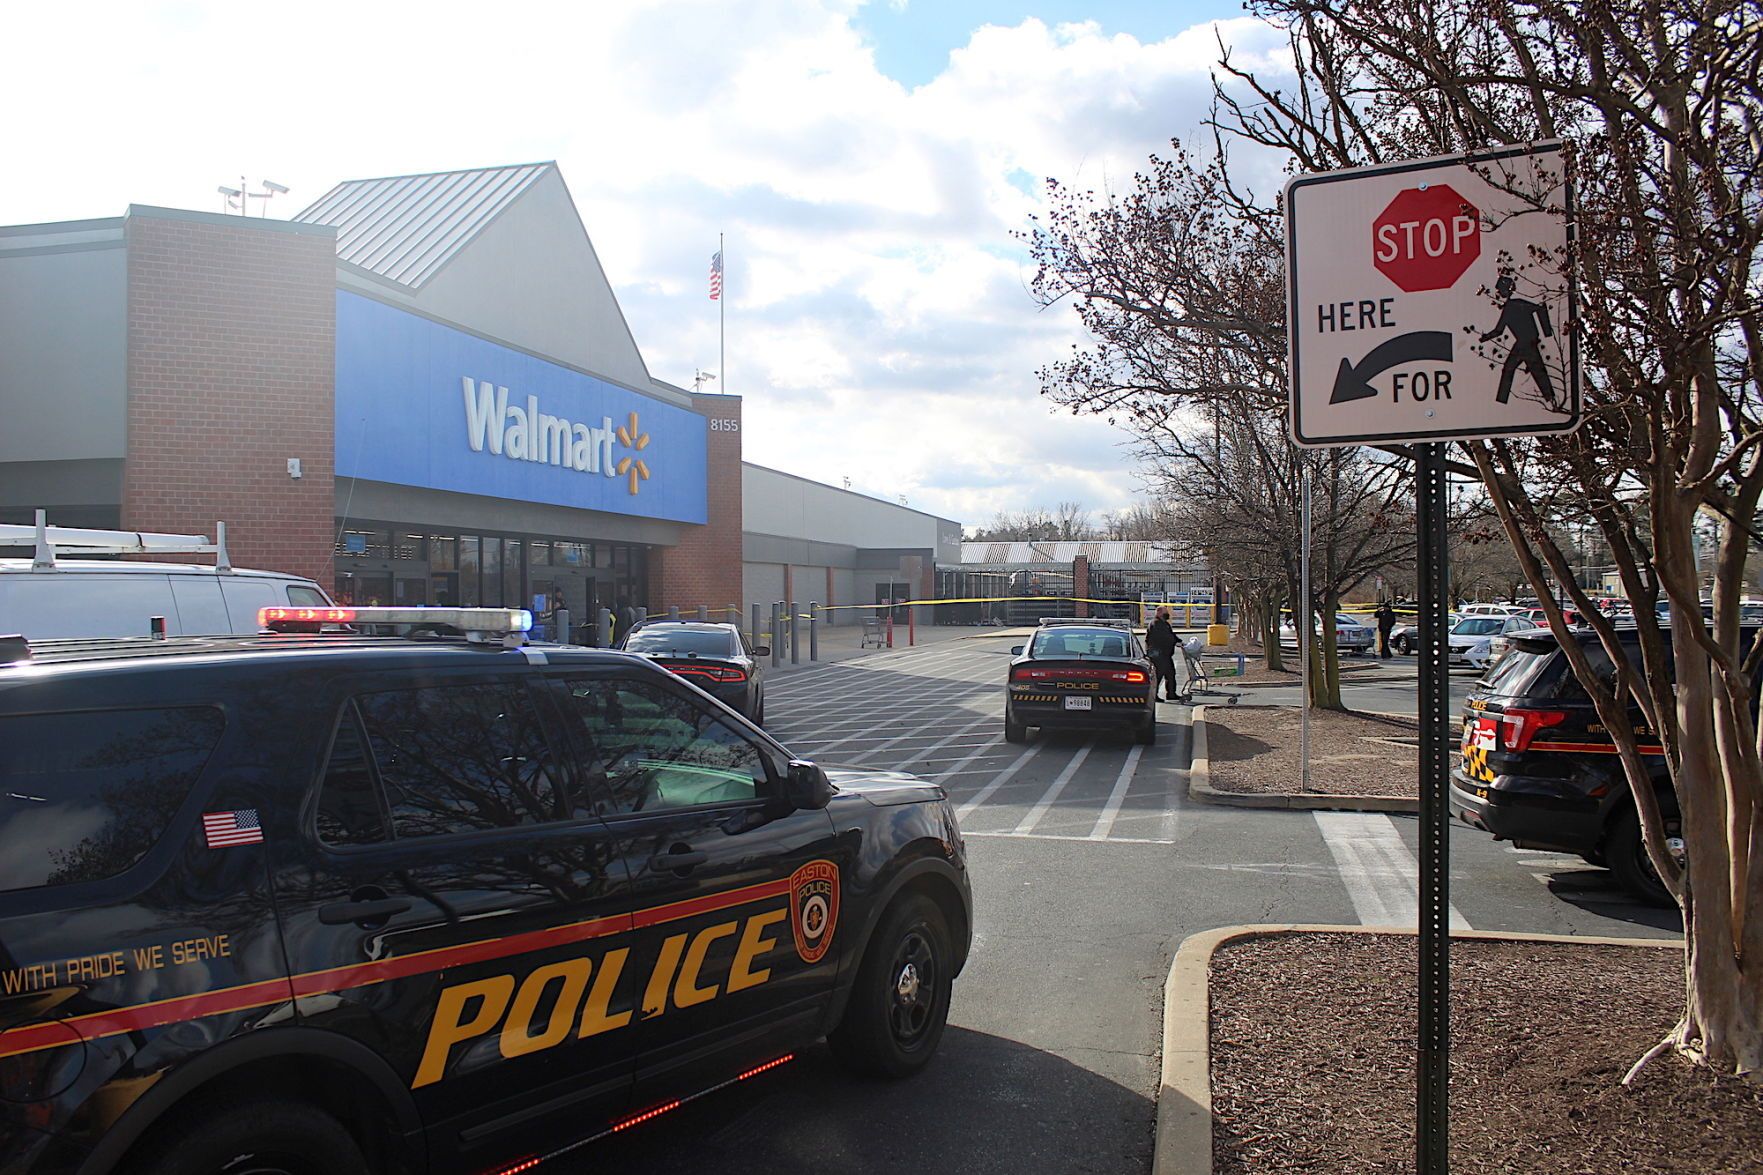 12 Yr- Old Teen Charged With Stealing At A Local Walmart in Easton MD